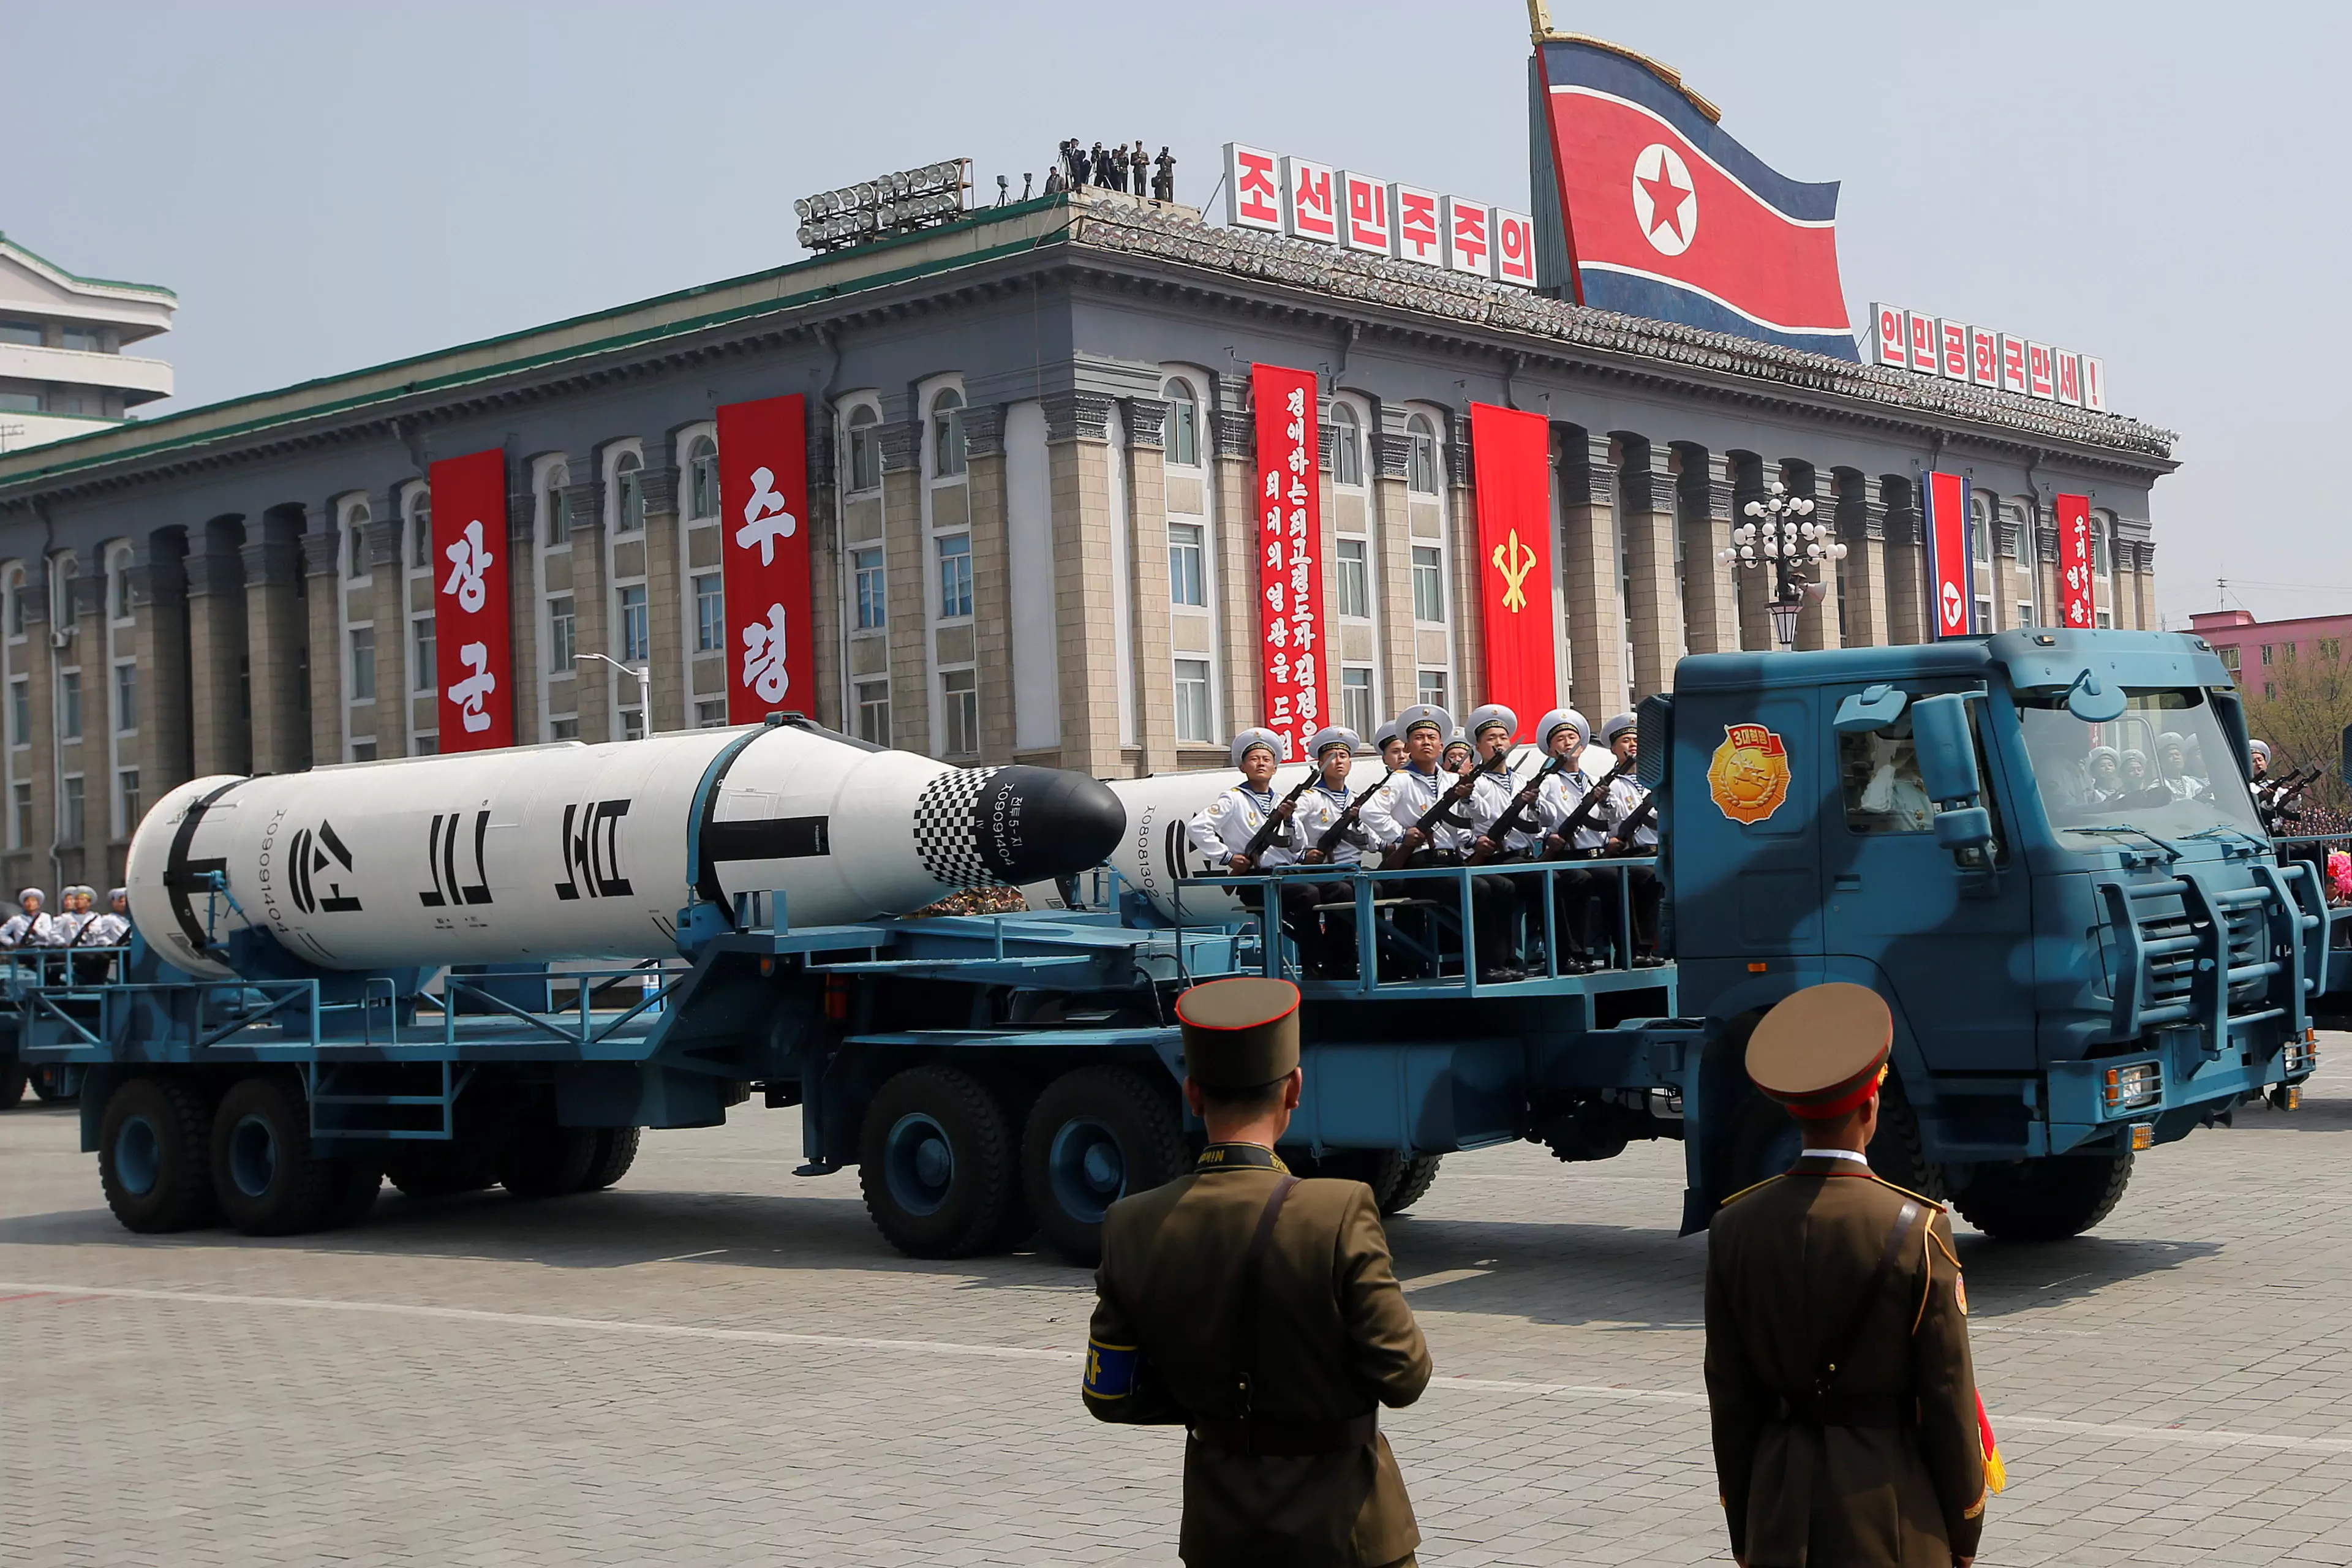 Vehicles carry missiles during a military parade in Pyongyang.